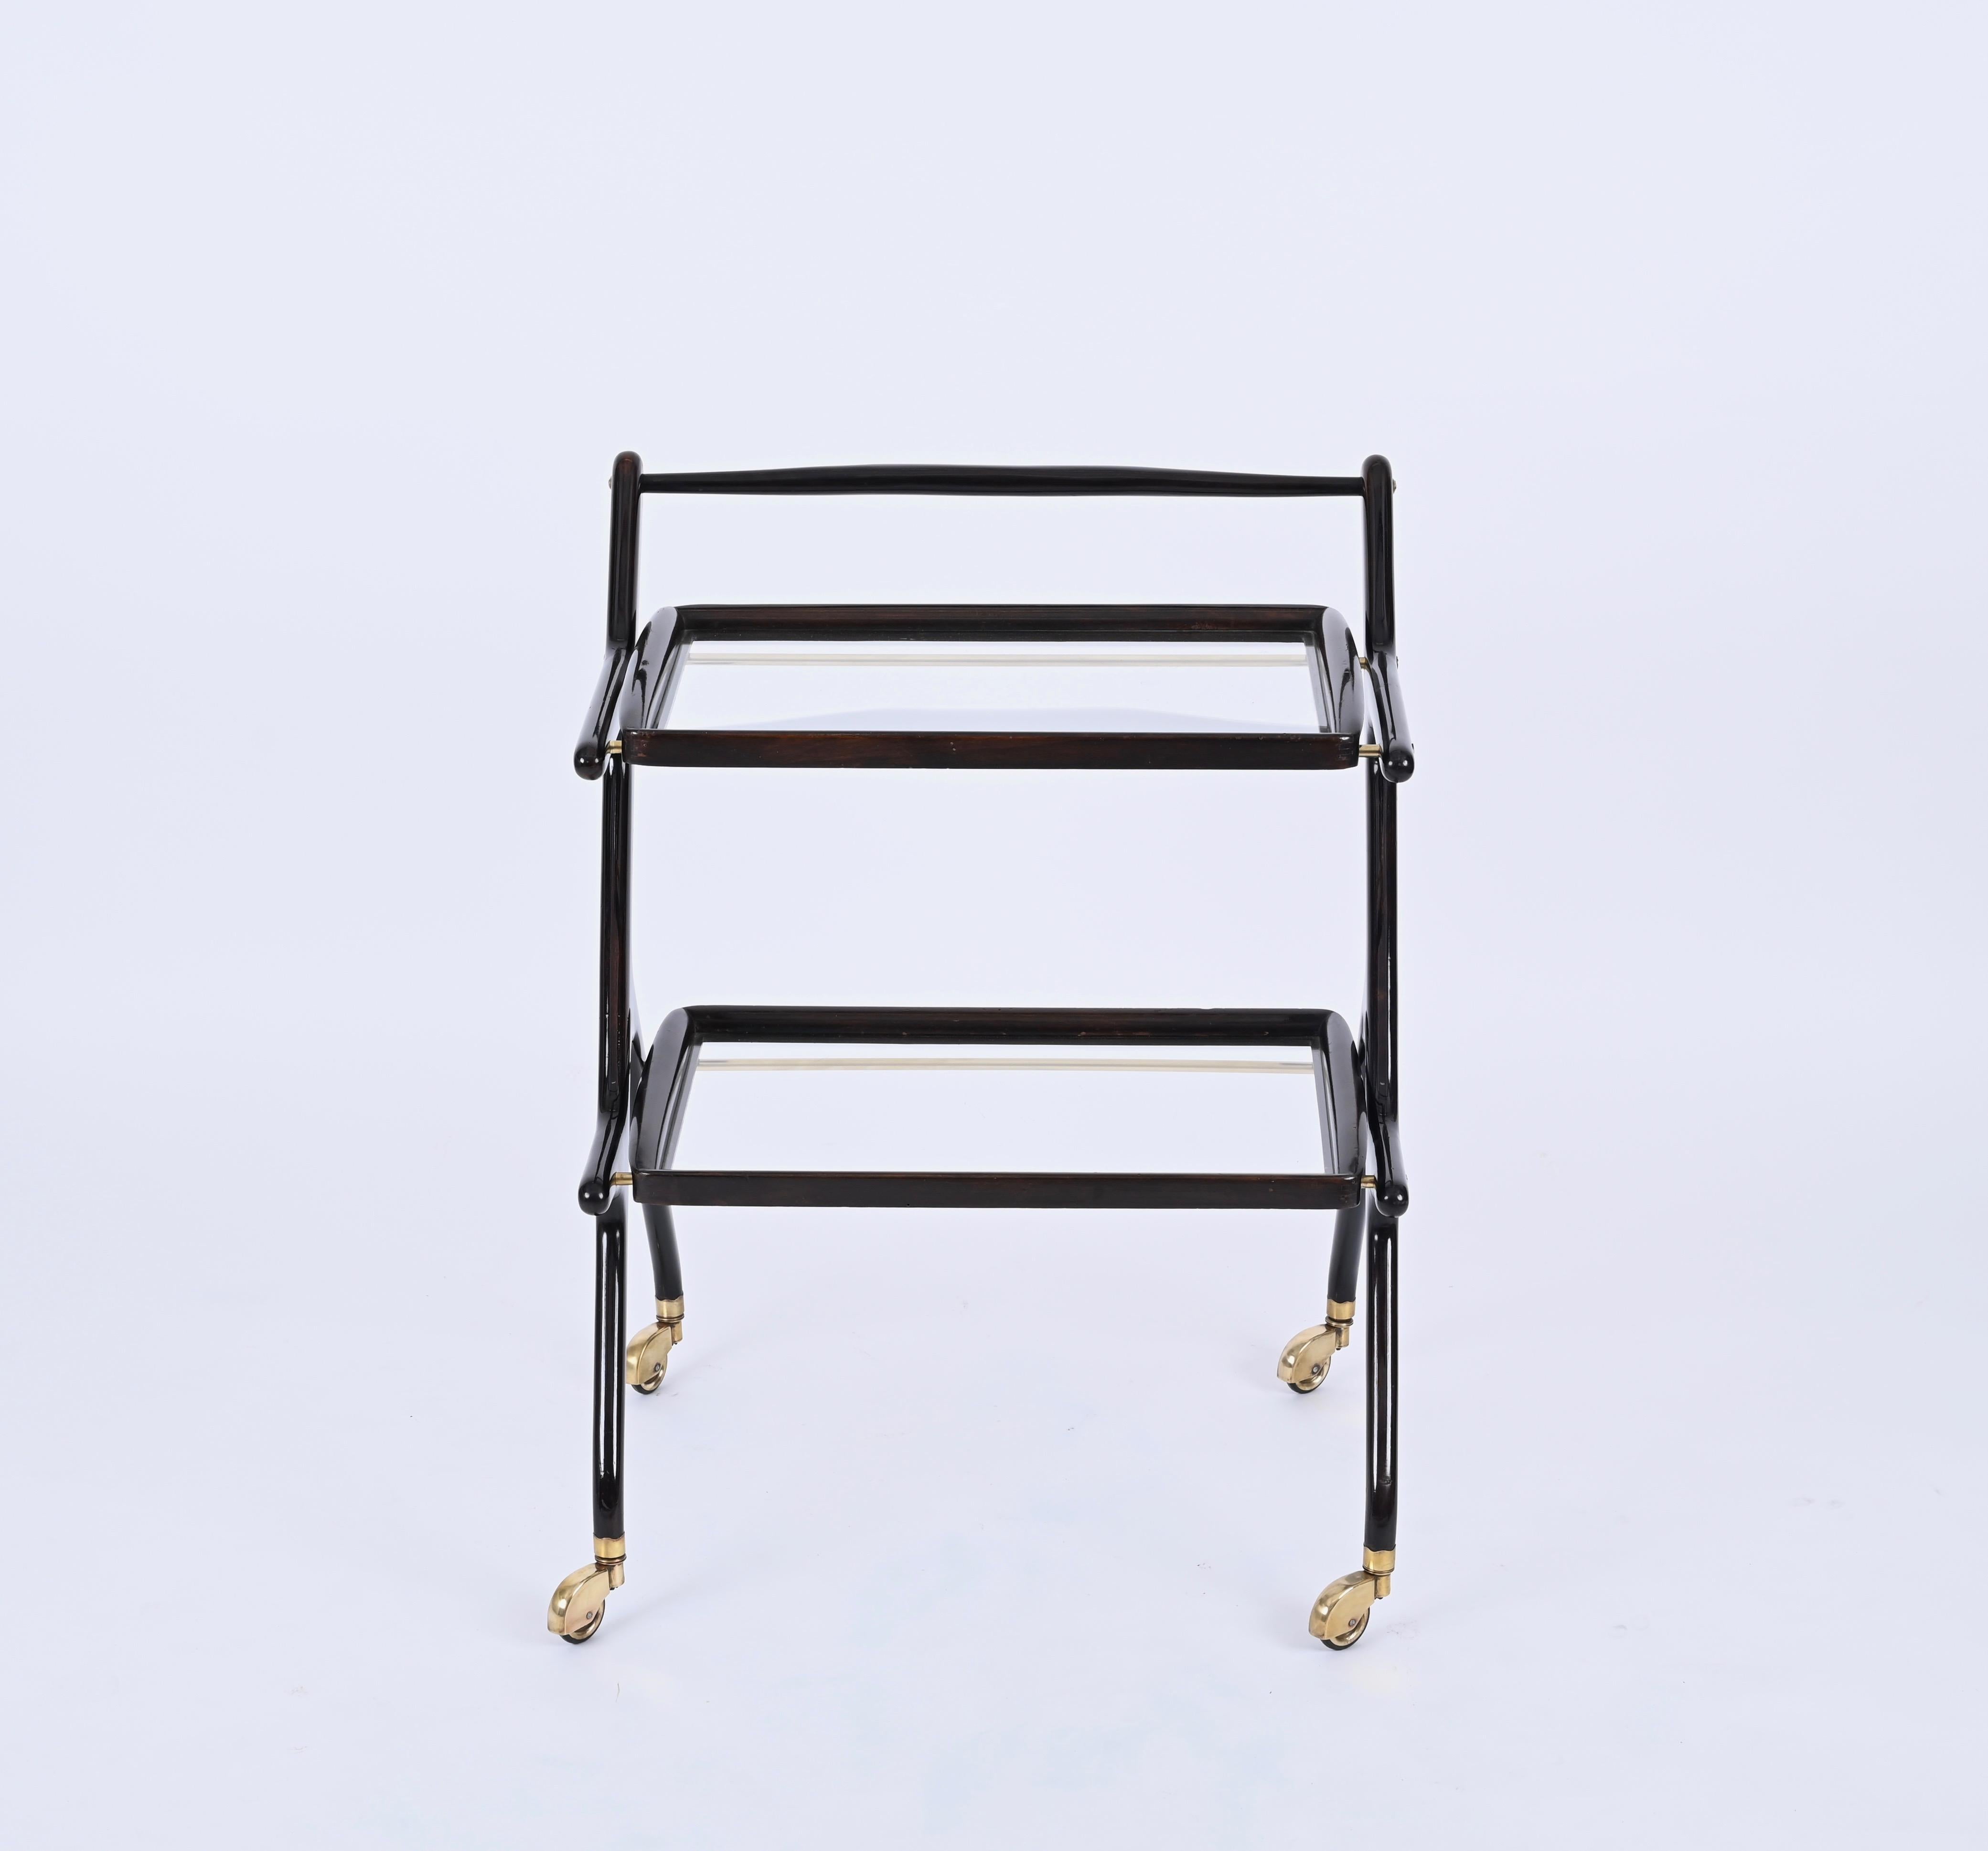 Mid-Century Modern Cesare Lacca Midcentury Wood and Glass Italian Trolley Bar Cart, 1950s For Sale